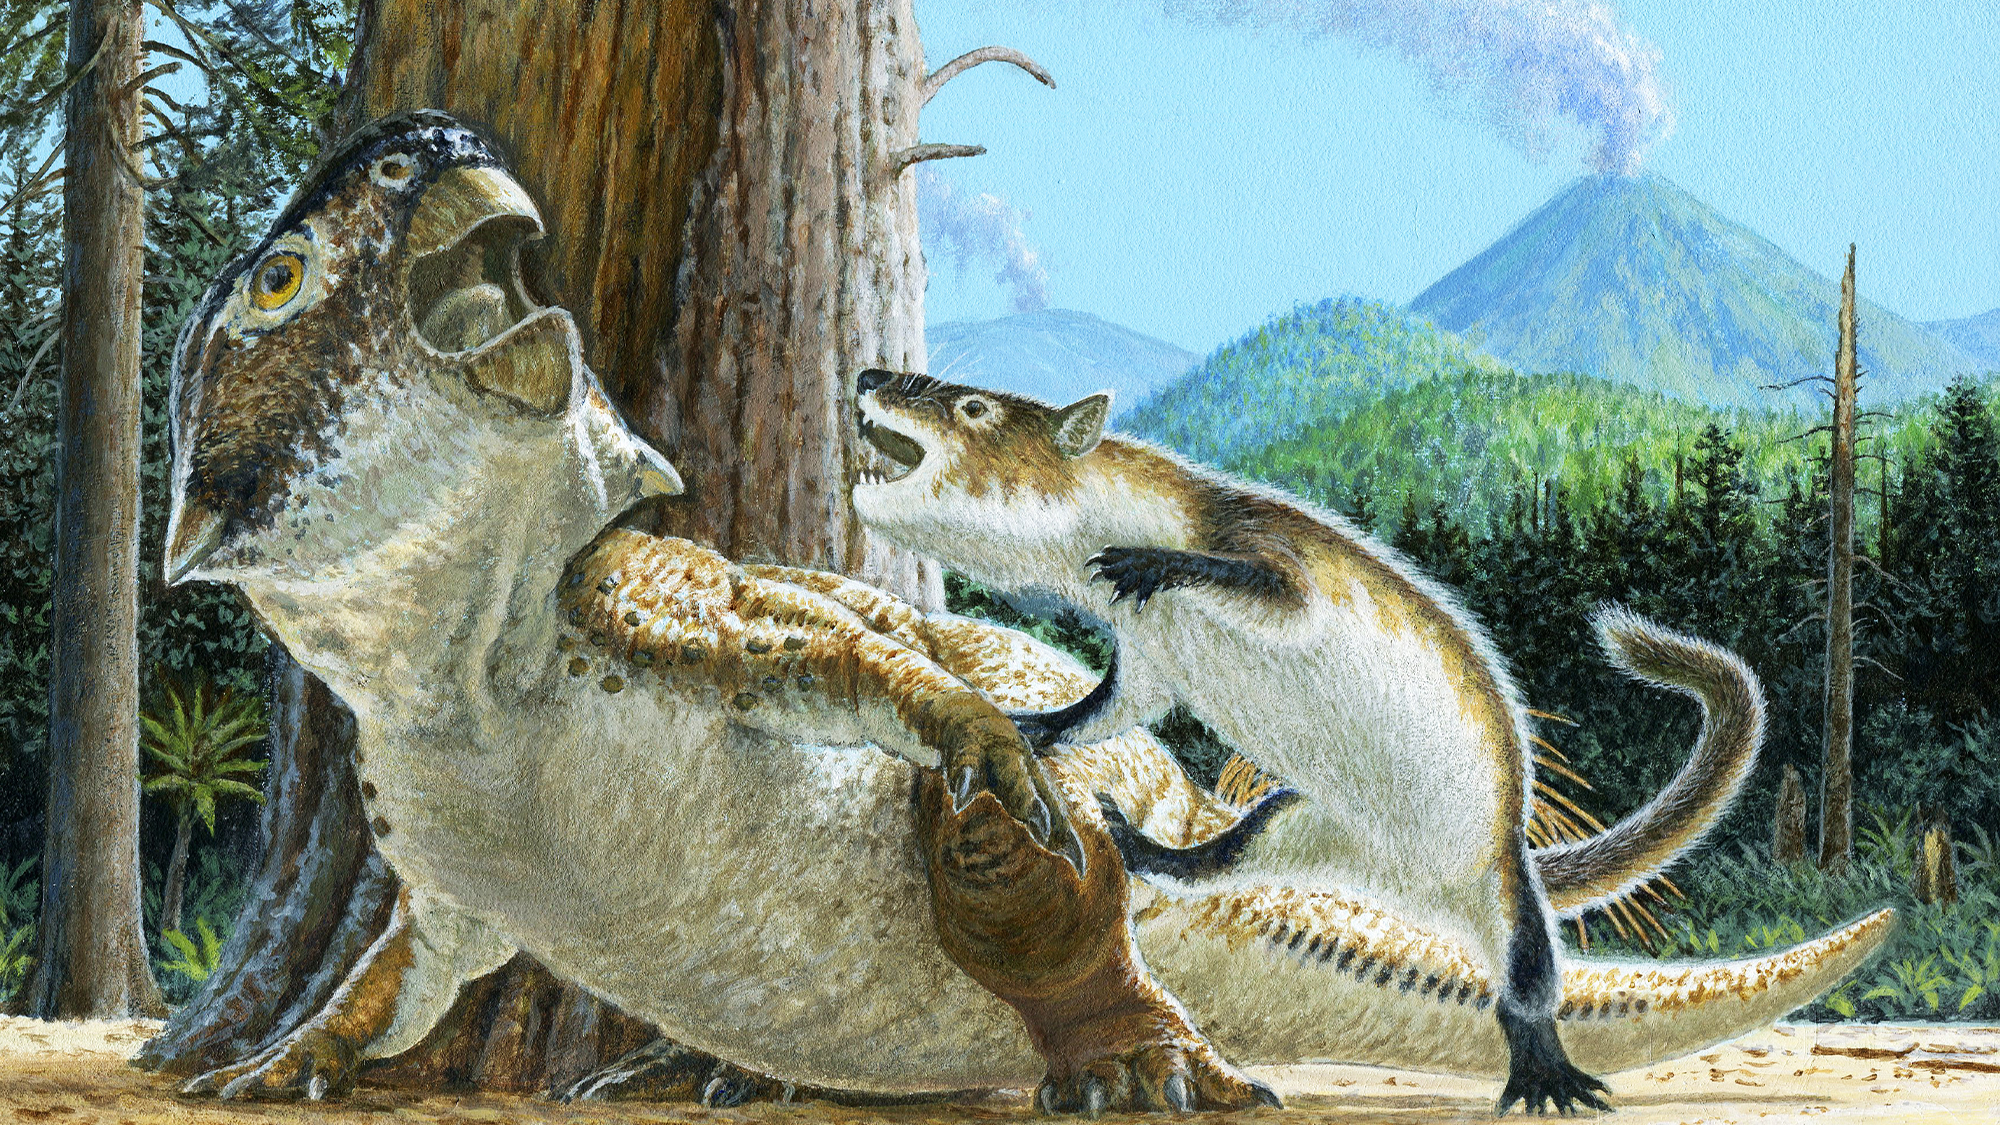 This badger-like mammal may have died while trying to eat a dinosaur